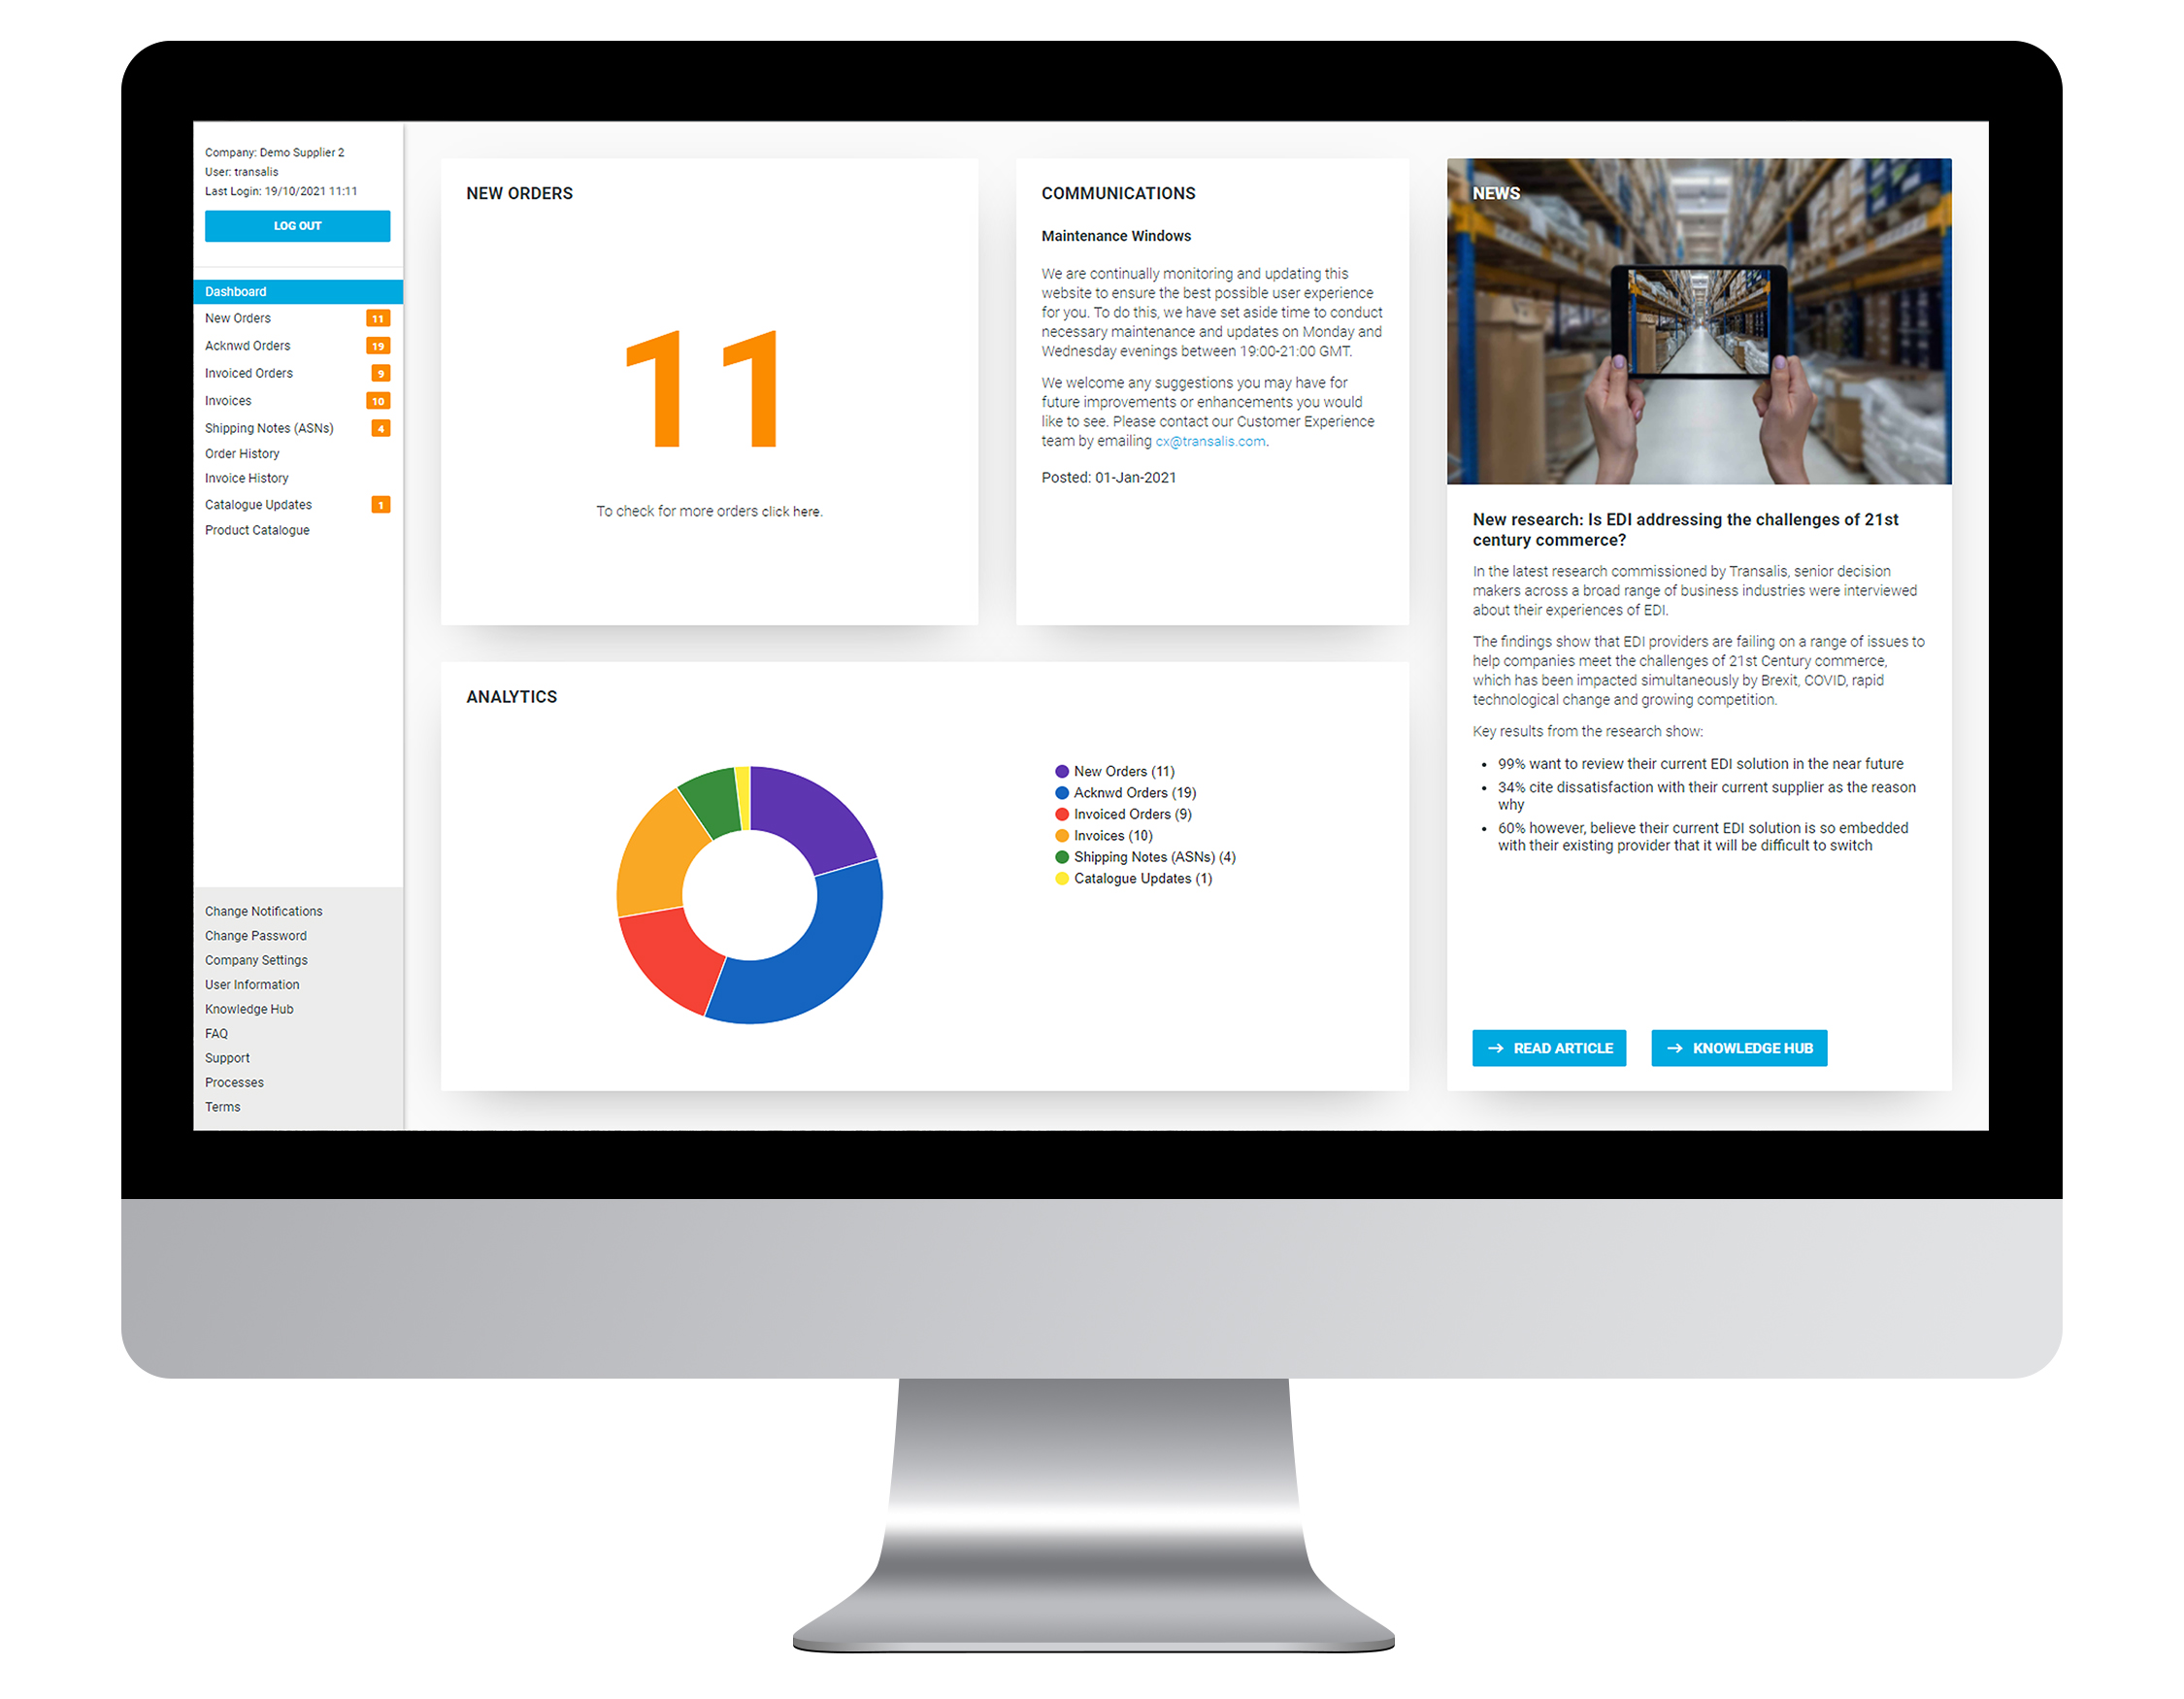 Transalis eDI user platform. This is the main dashboard, which provides a high level overview of your business data. The latest industry announcements can also be found here on the noticeboard, as well as links to useful resources from our Knowledge Hub.